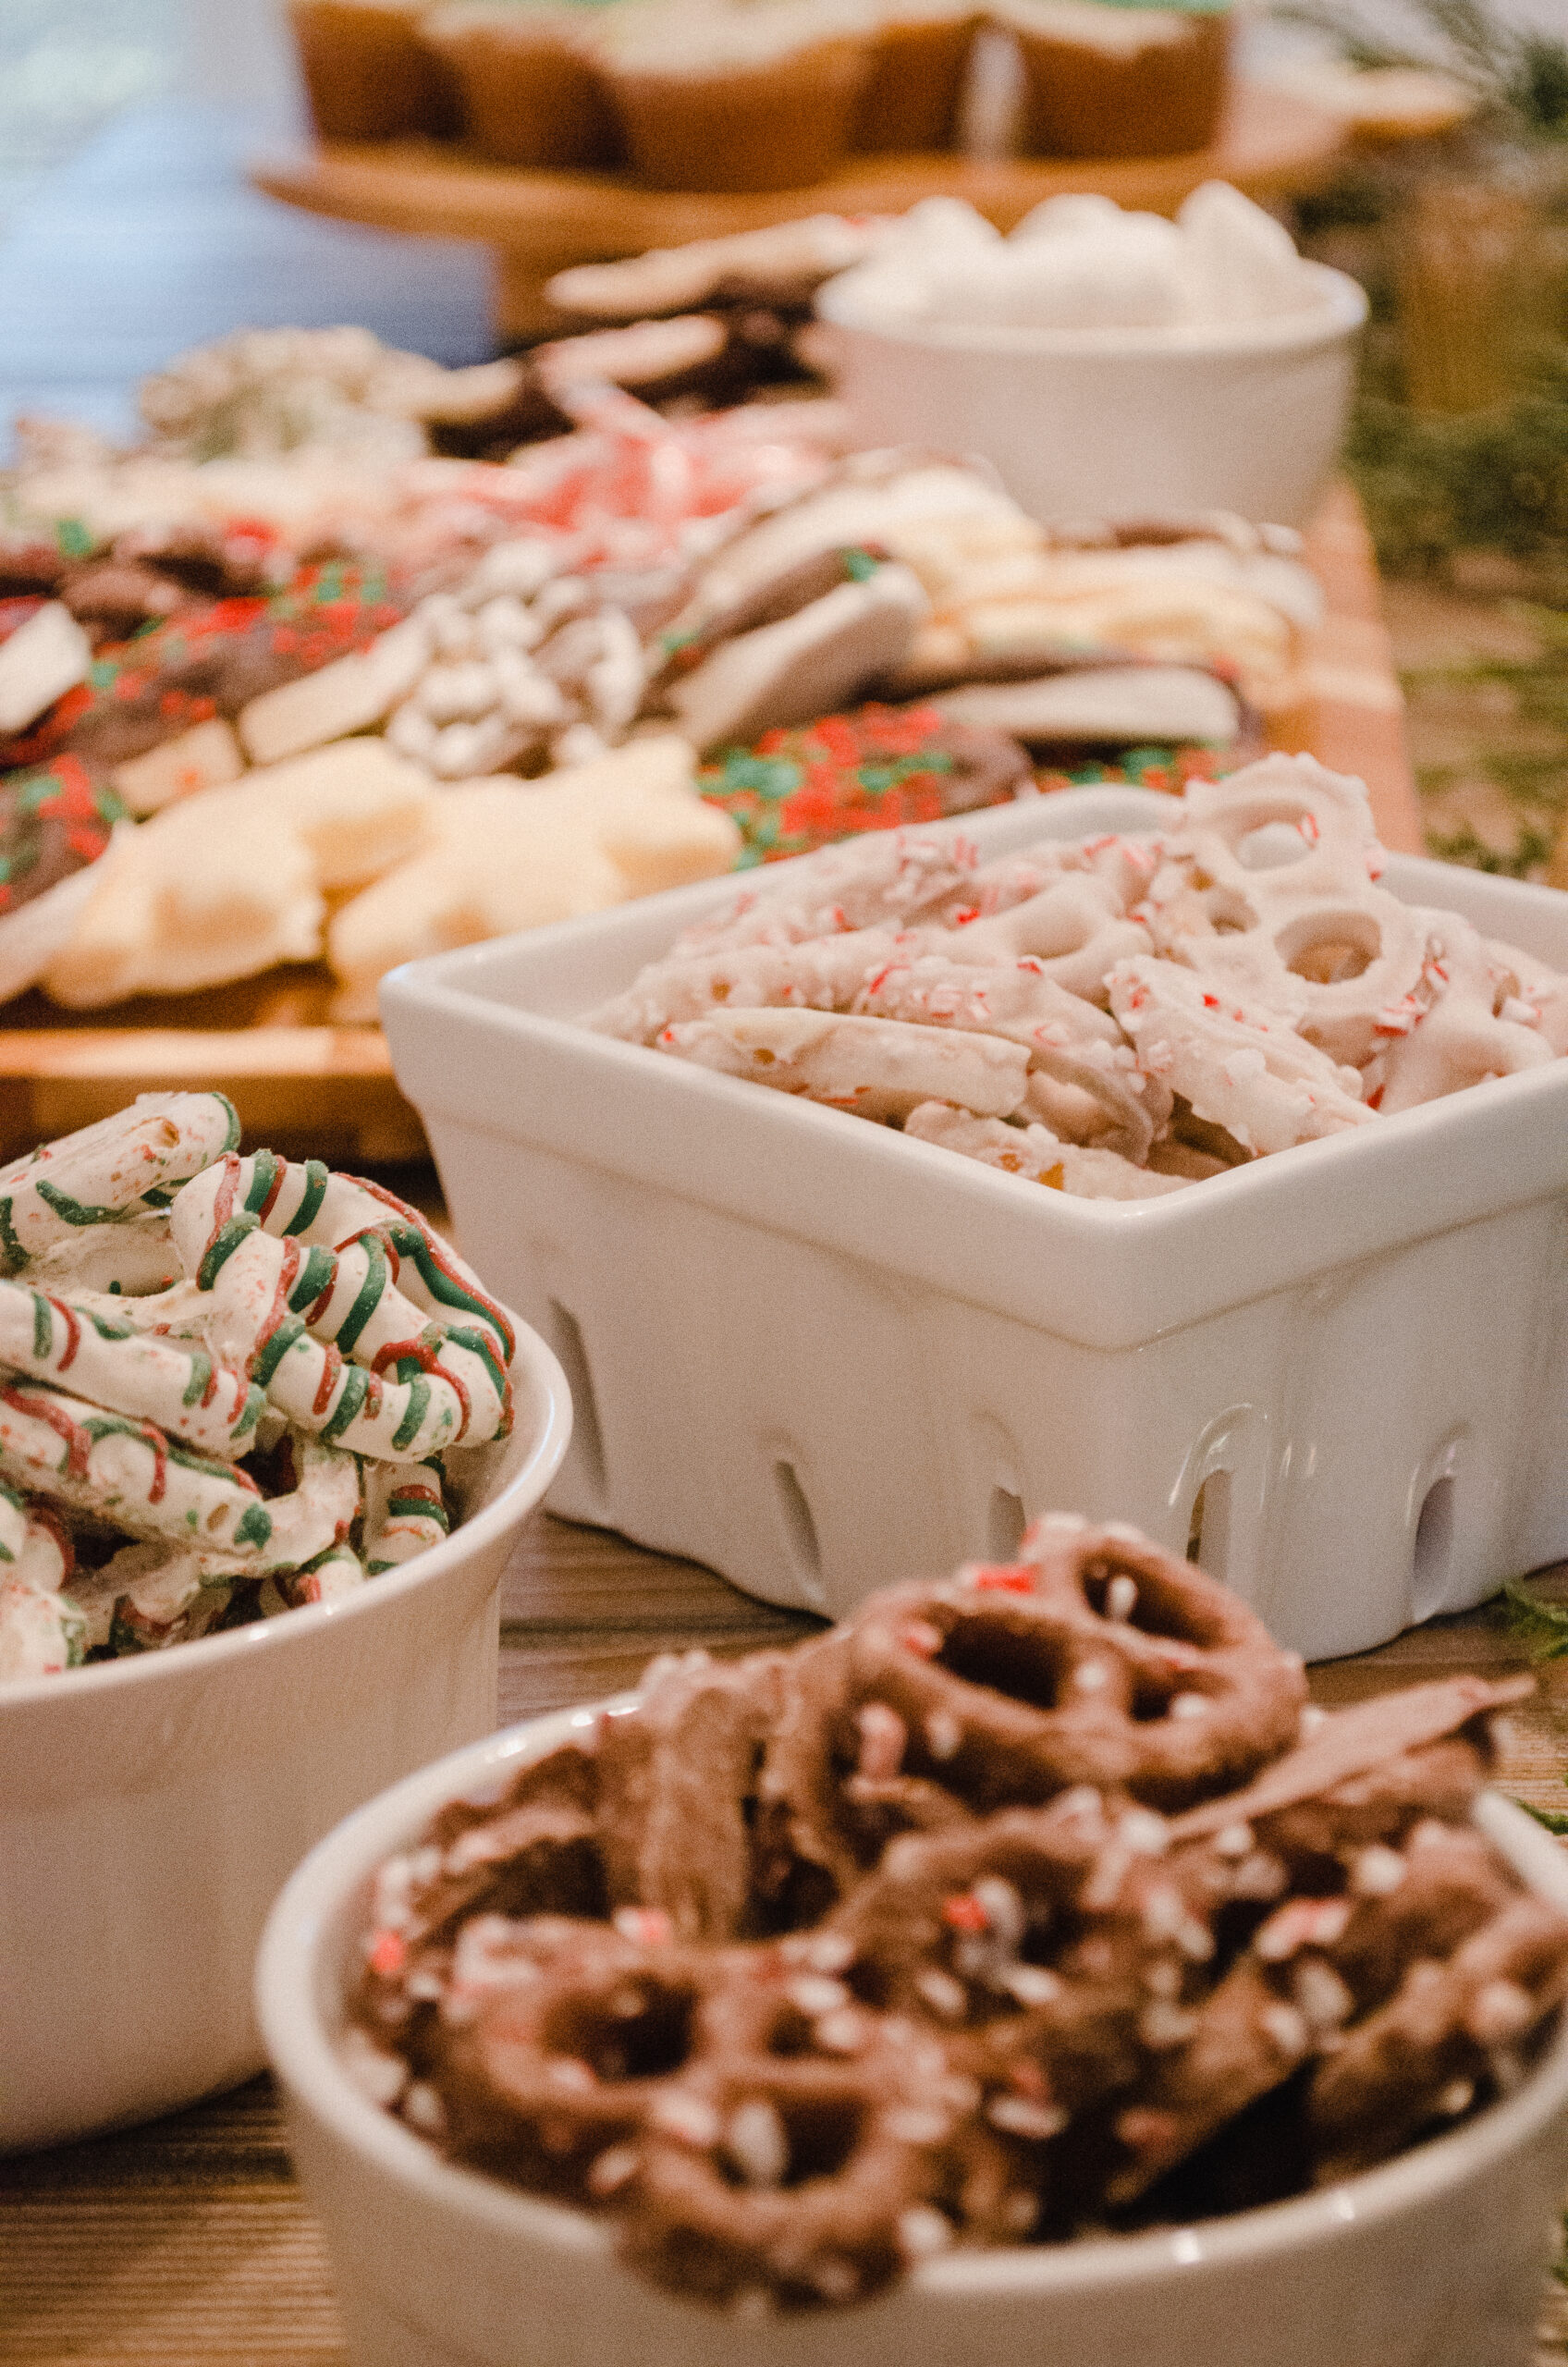 Connecticut life style blogger Lauren McBride shares a photo of her holiday dessert treats.